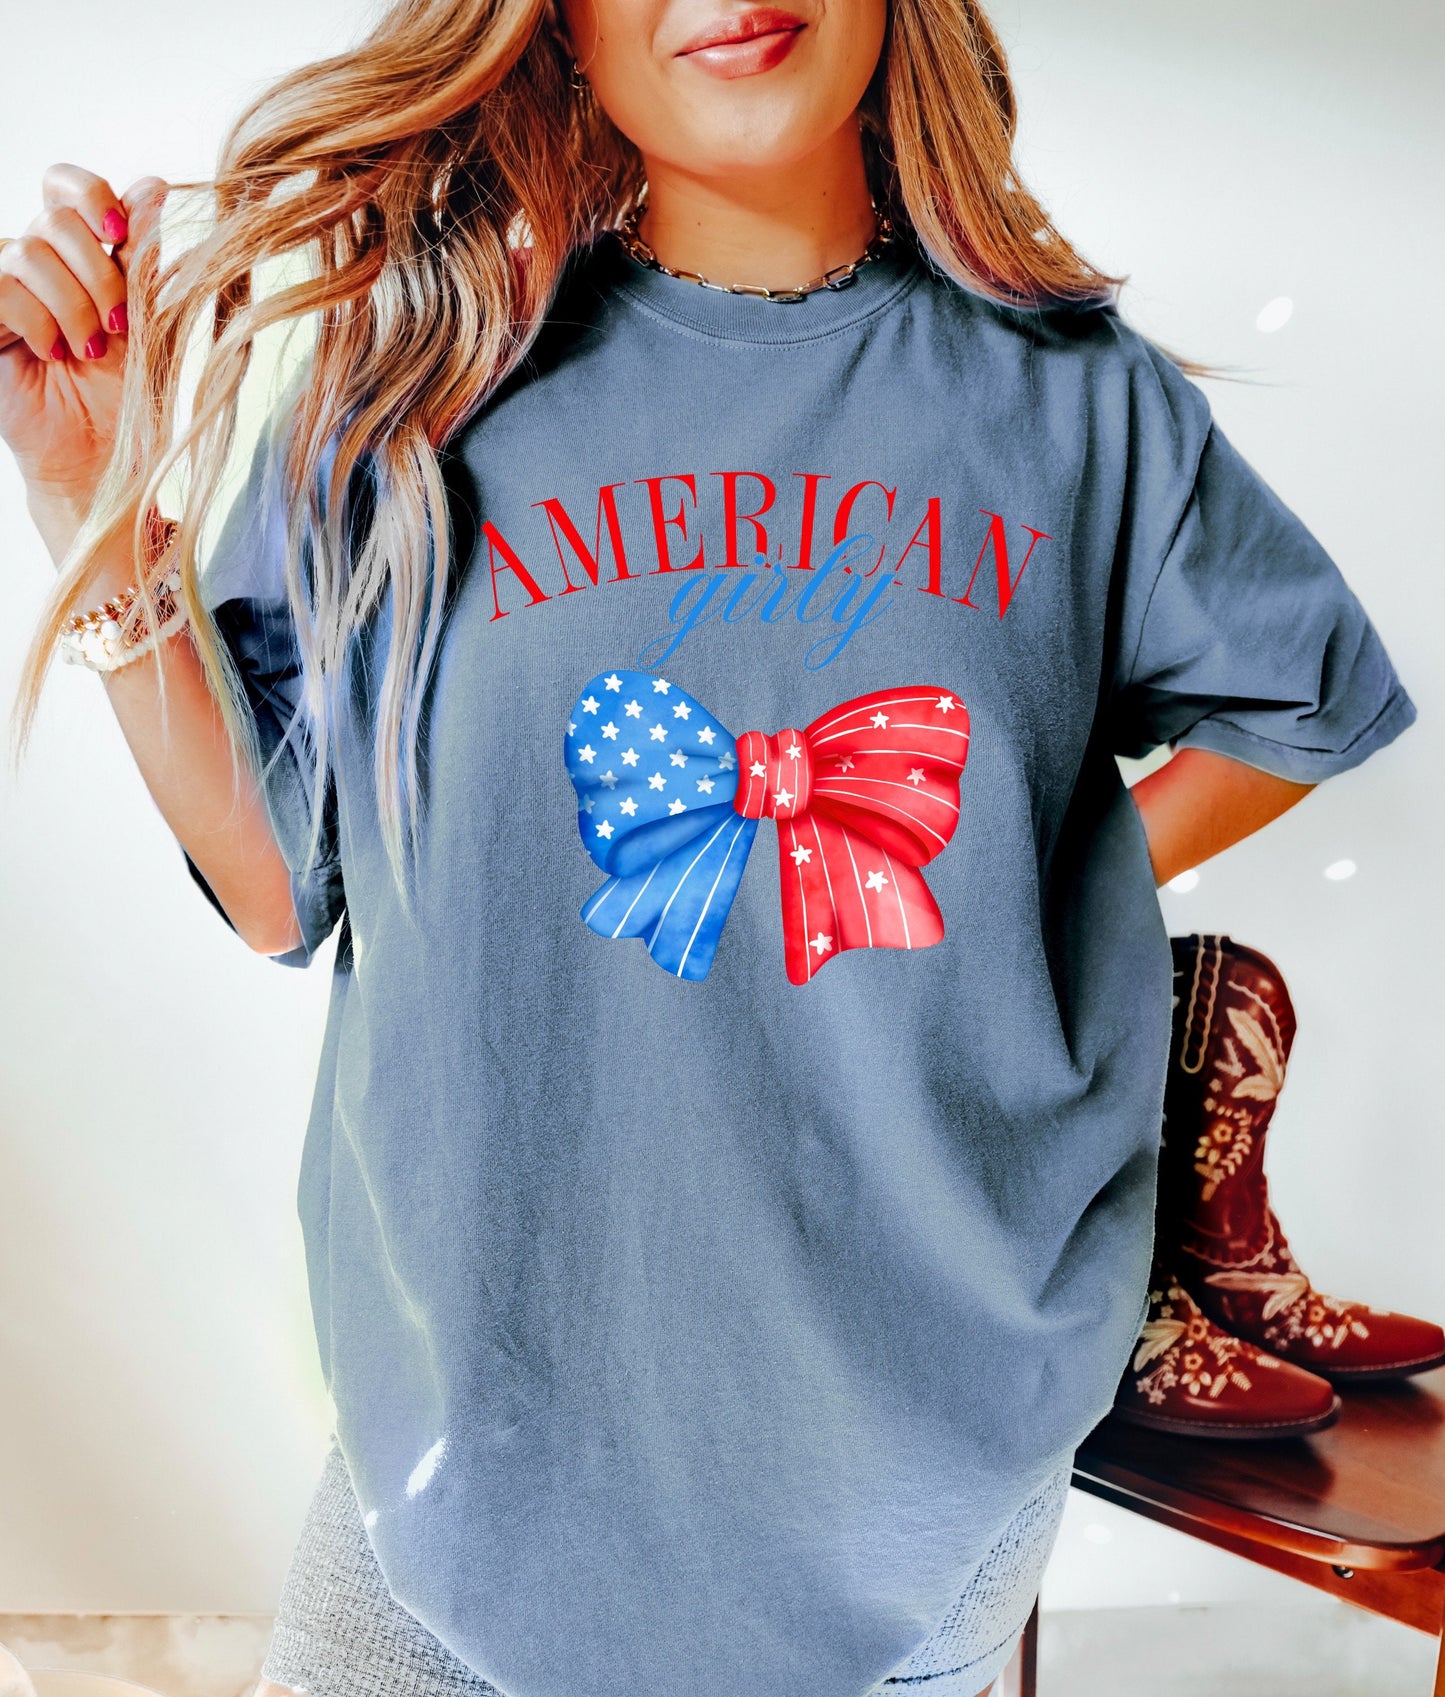 July 4th Shirt, Coquette 4th of July Shirt, USA Shirt, Retro 4th of July Shirt, Comfort Colors Shirt, Summertime Tee, American Girly Big Bow